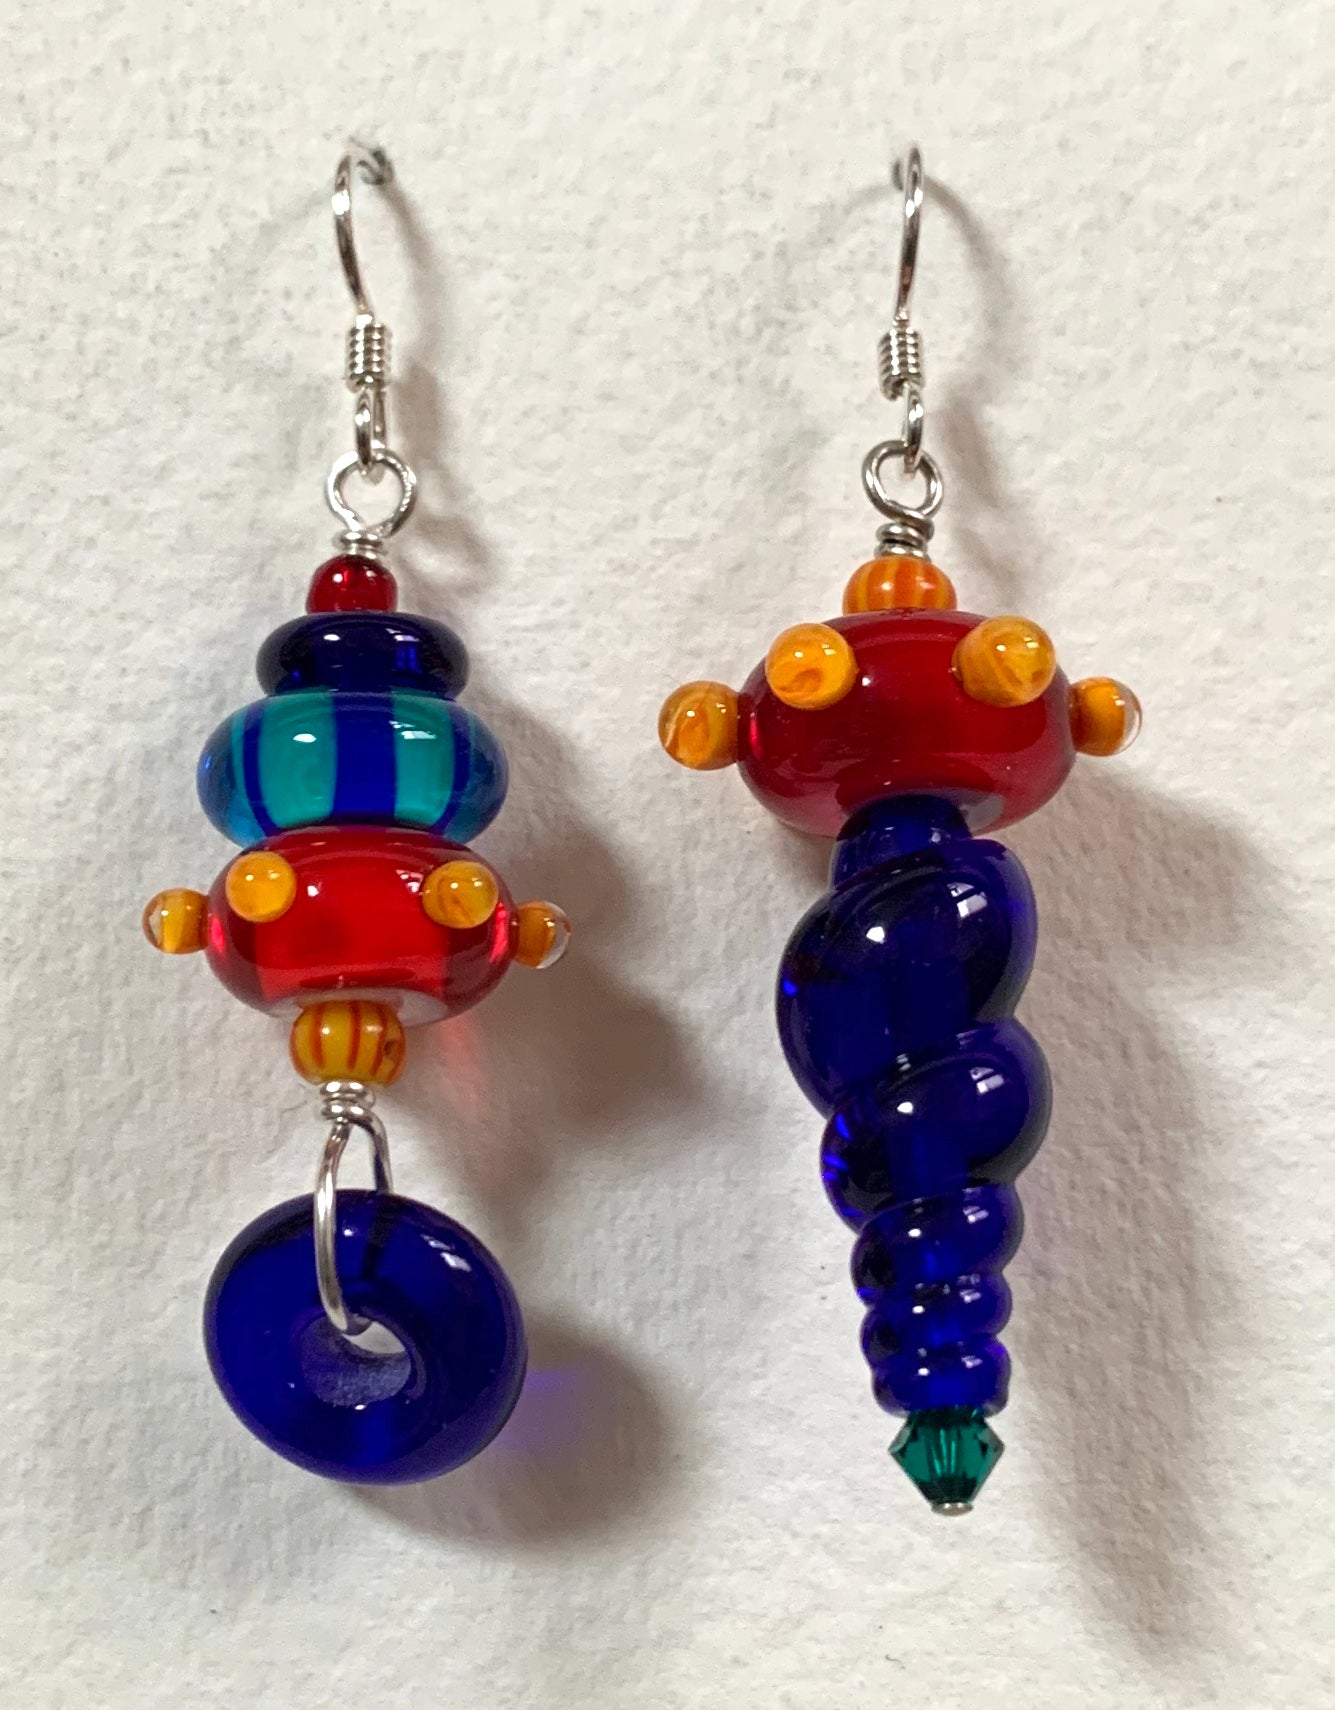 Asymmetrical earrings (multi with red/yellow dots)